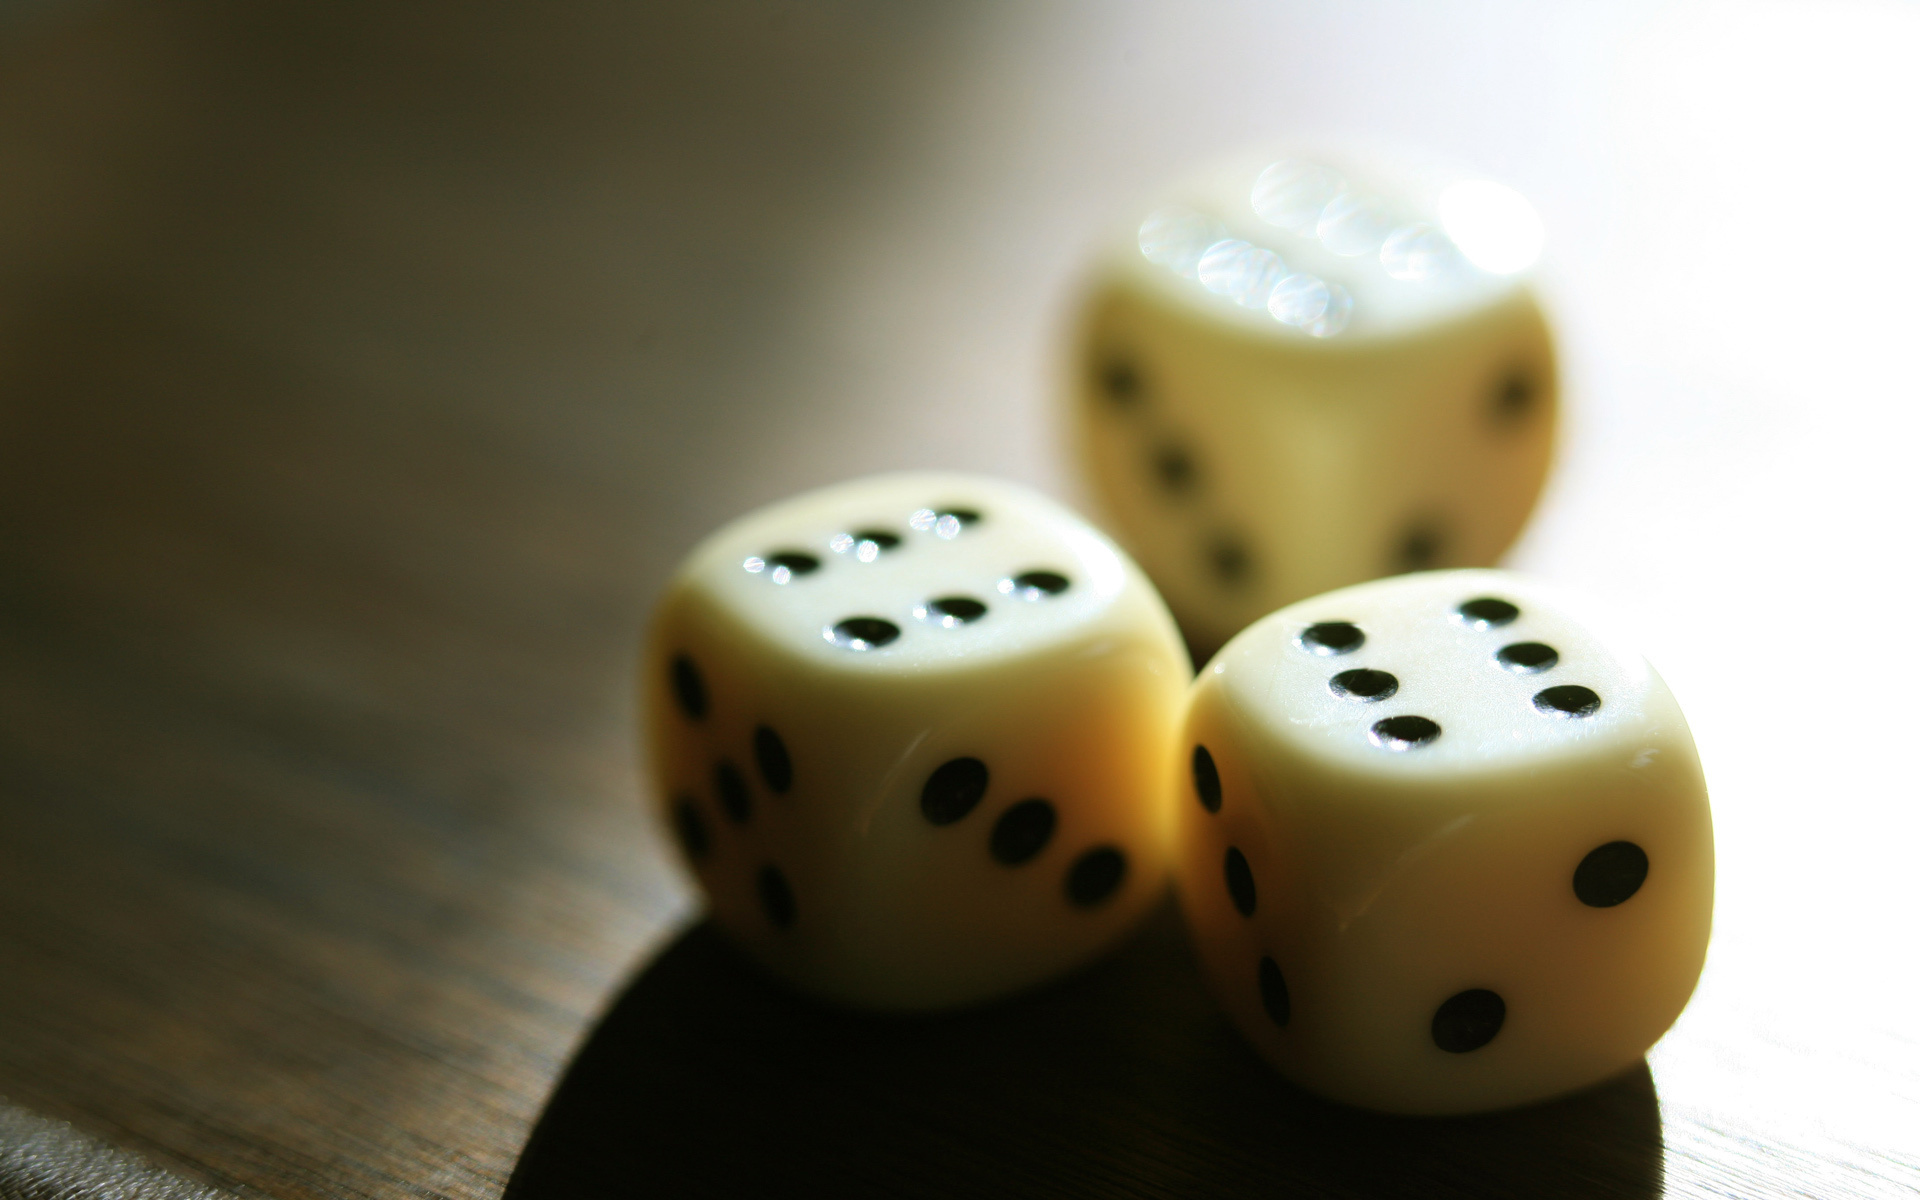 Wallpapers dice numbers tags on the desktop